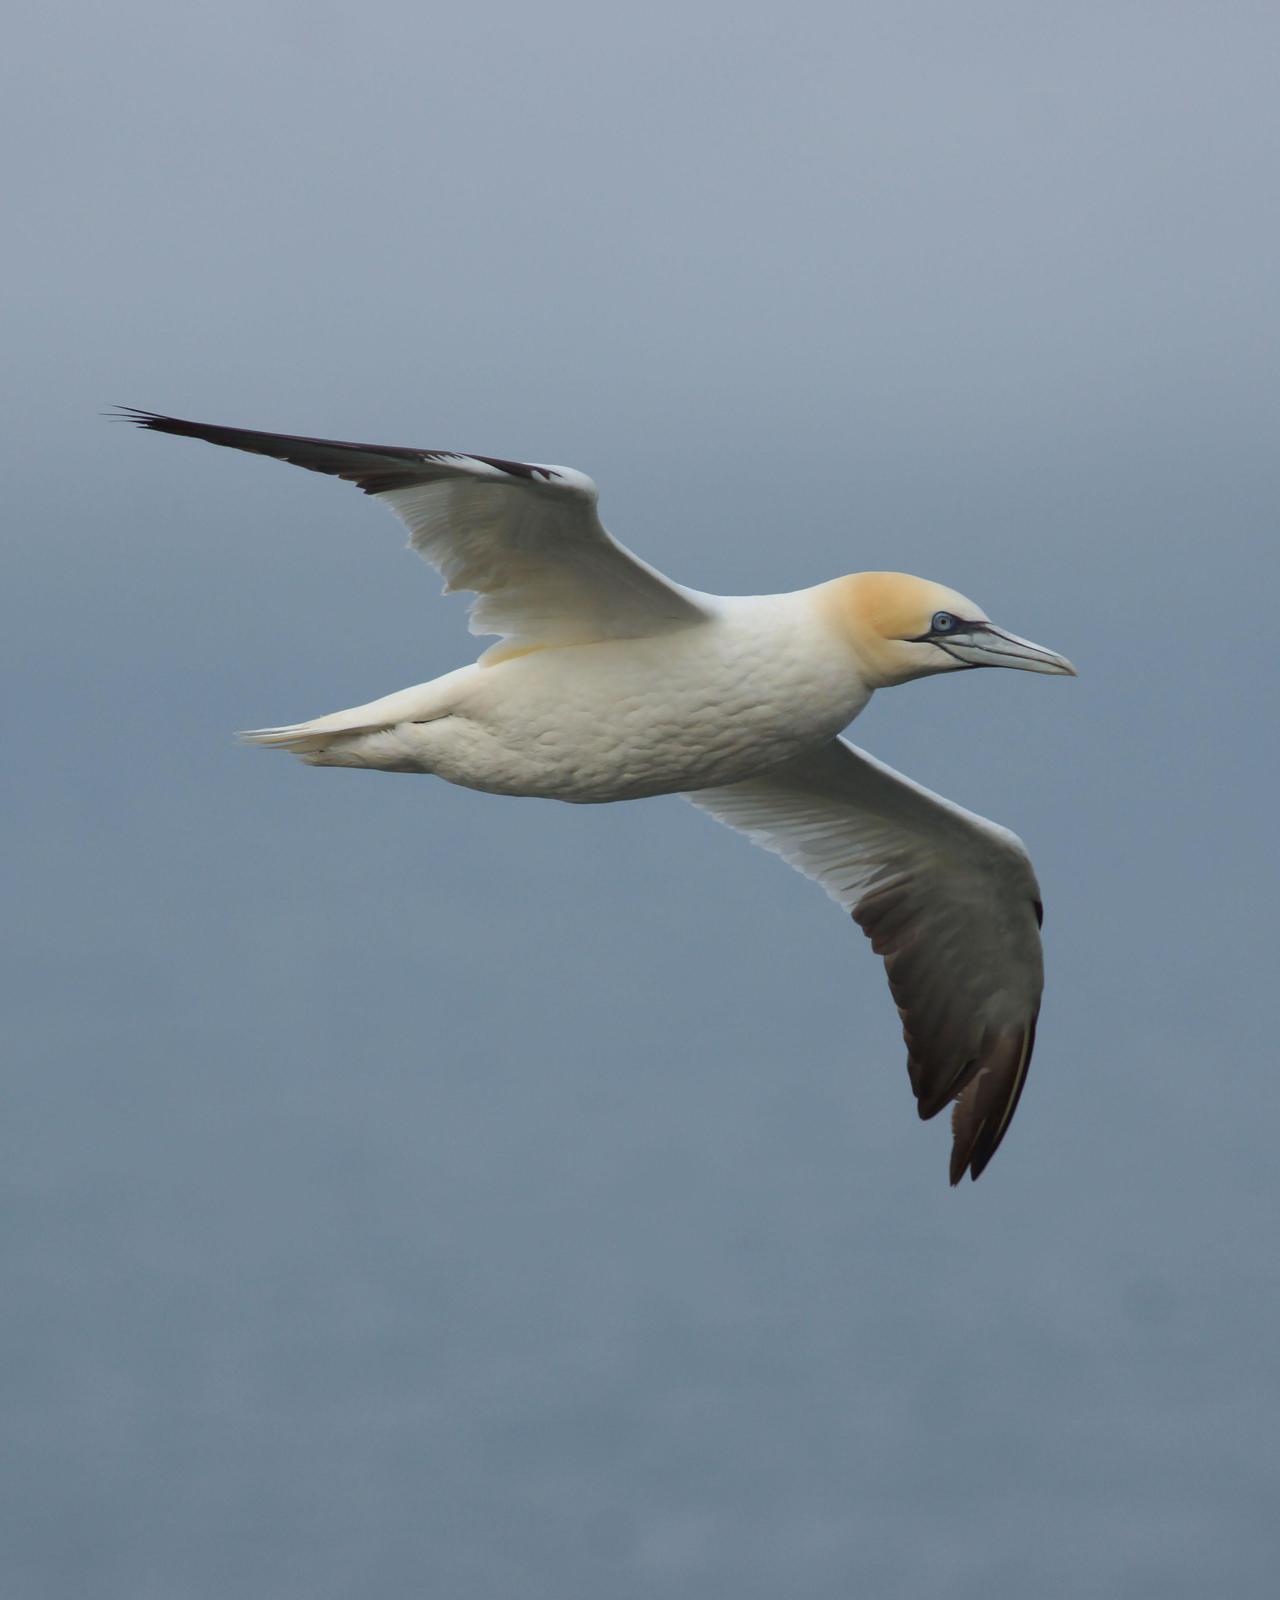 Northern Gannet Photo by Steve Percival